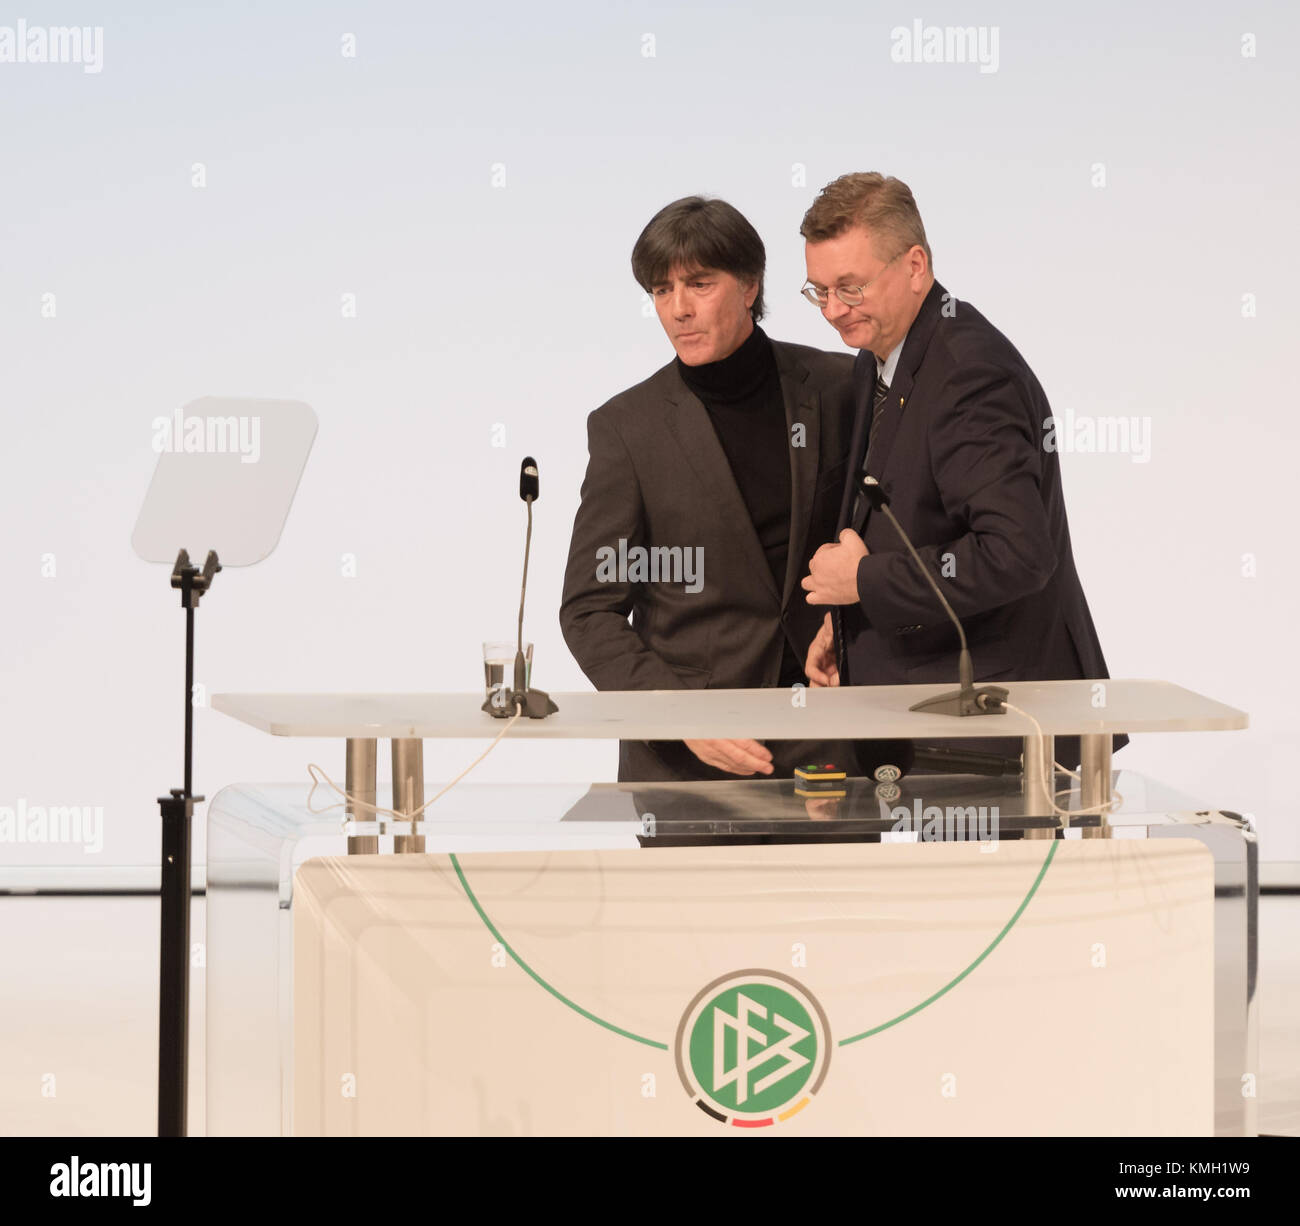 Frankfurt, Germany. 8th December, 2017. Extraordinay DFB Bundestag, Congress Center  . In the Picture: German National Team Head Coach Joachim Loew speaks to the audience and the DFB President Reinhard Grindel shake his hand. Photo by Ulrich Roth / ulrich-roth.com/Alamy Live News Stock Photo